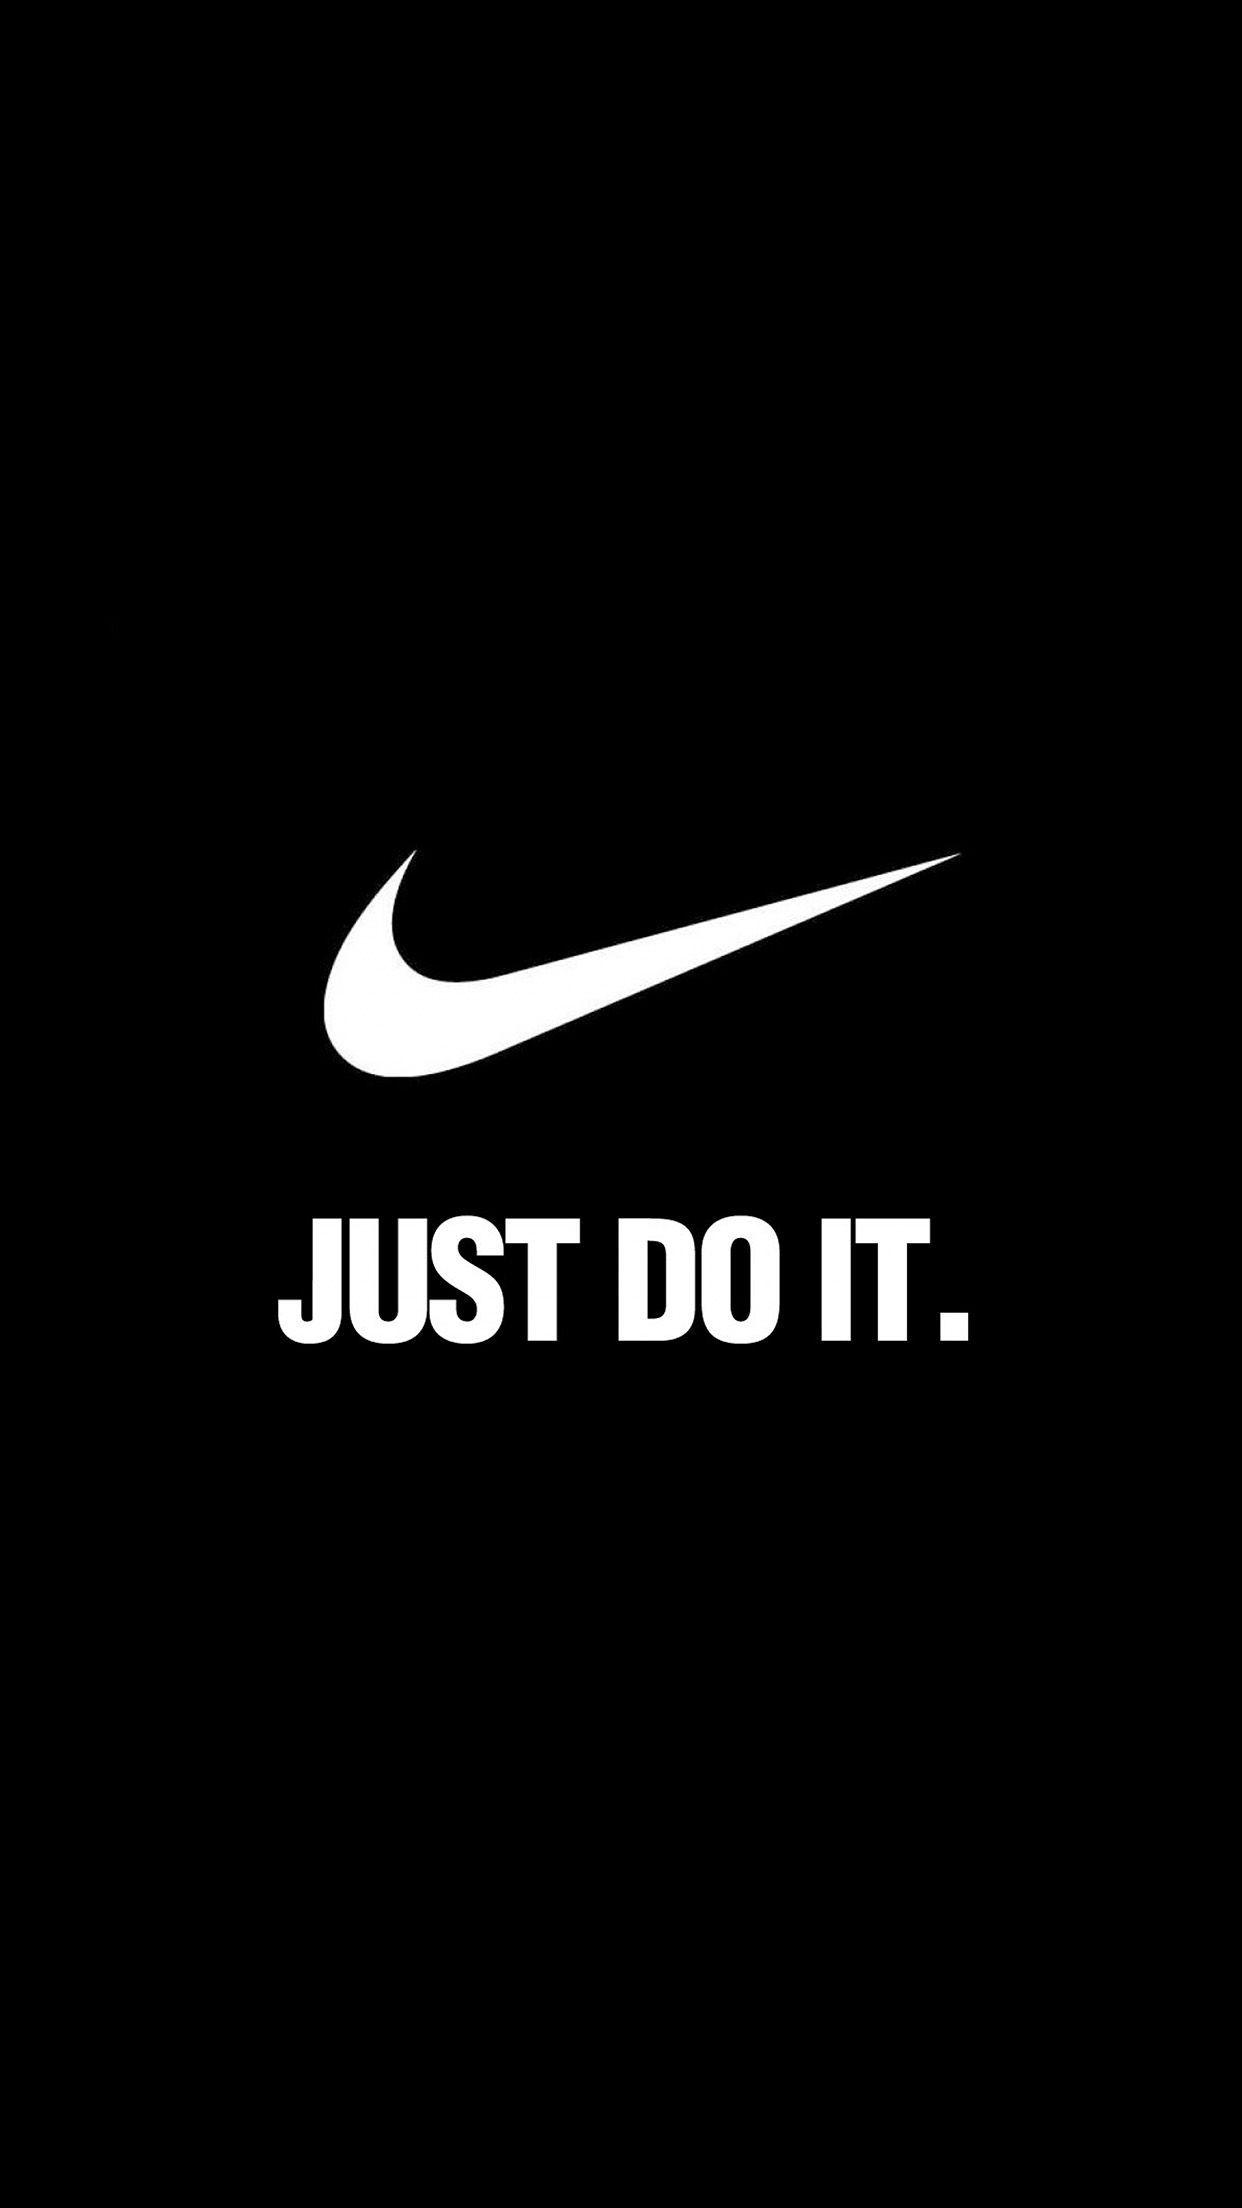 Just Do It iPhone Wallpaper Free Just Do It iPhone